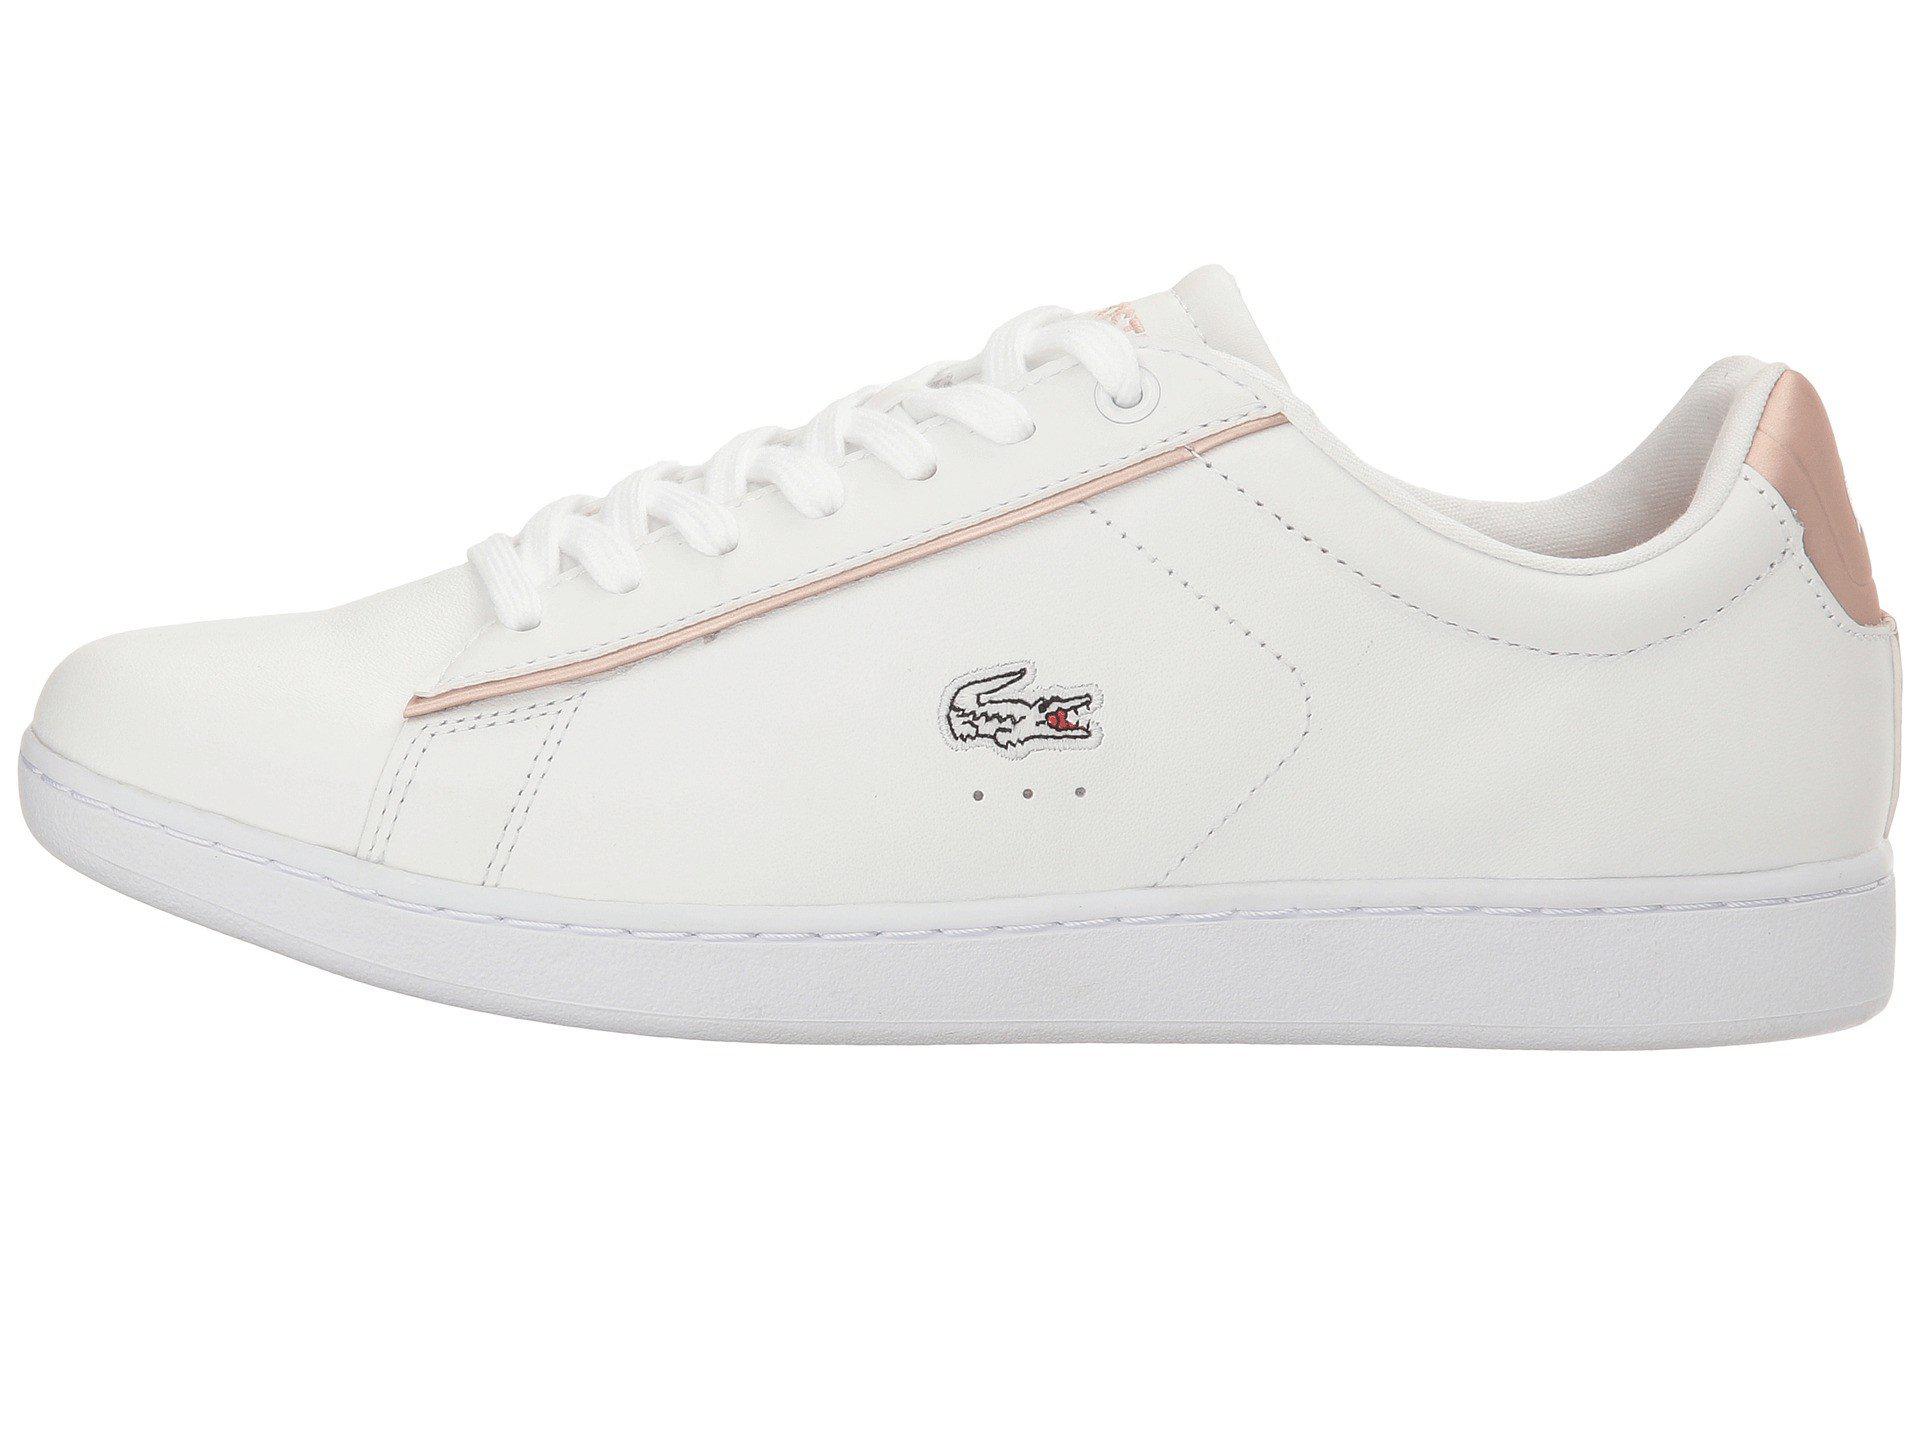 Lacoste Leather Carnaby Evo 217 2 in 